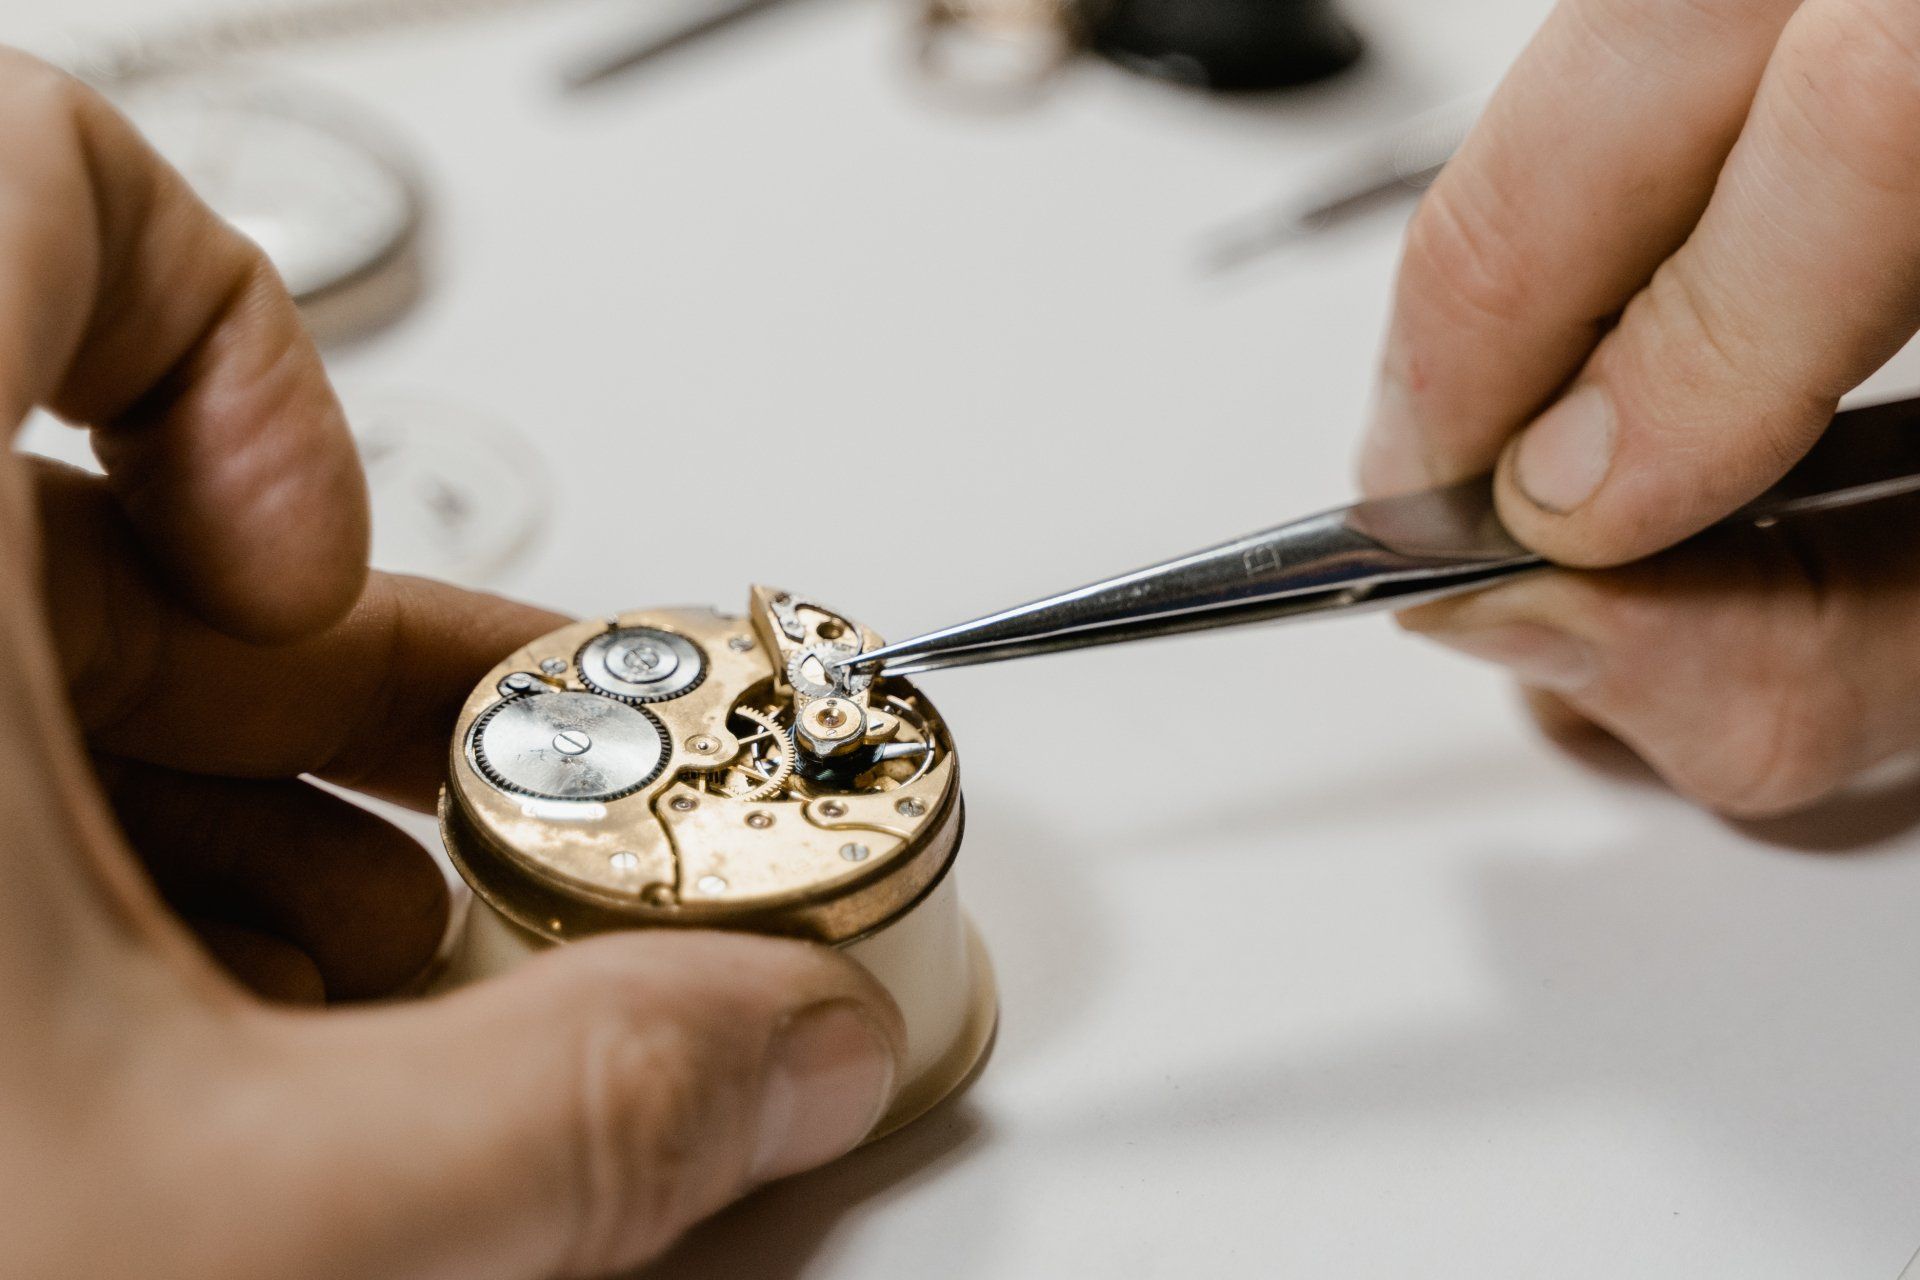 A person is fixing a watch with tweezers.